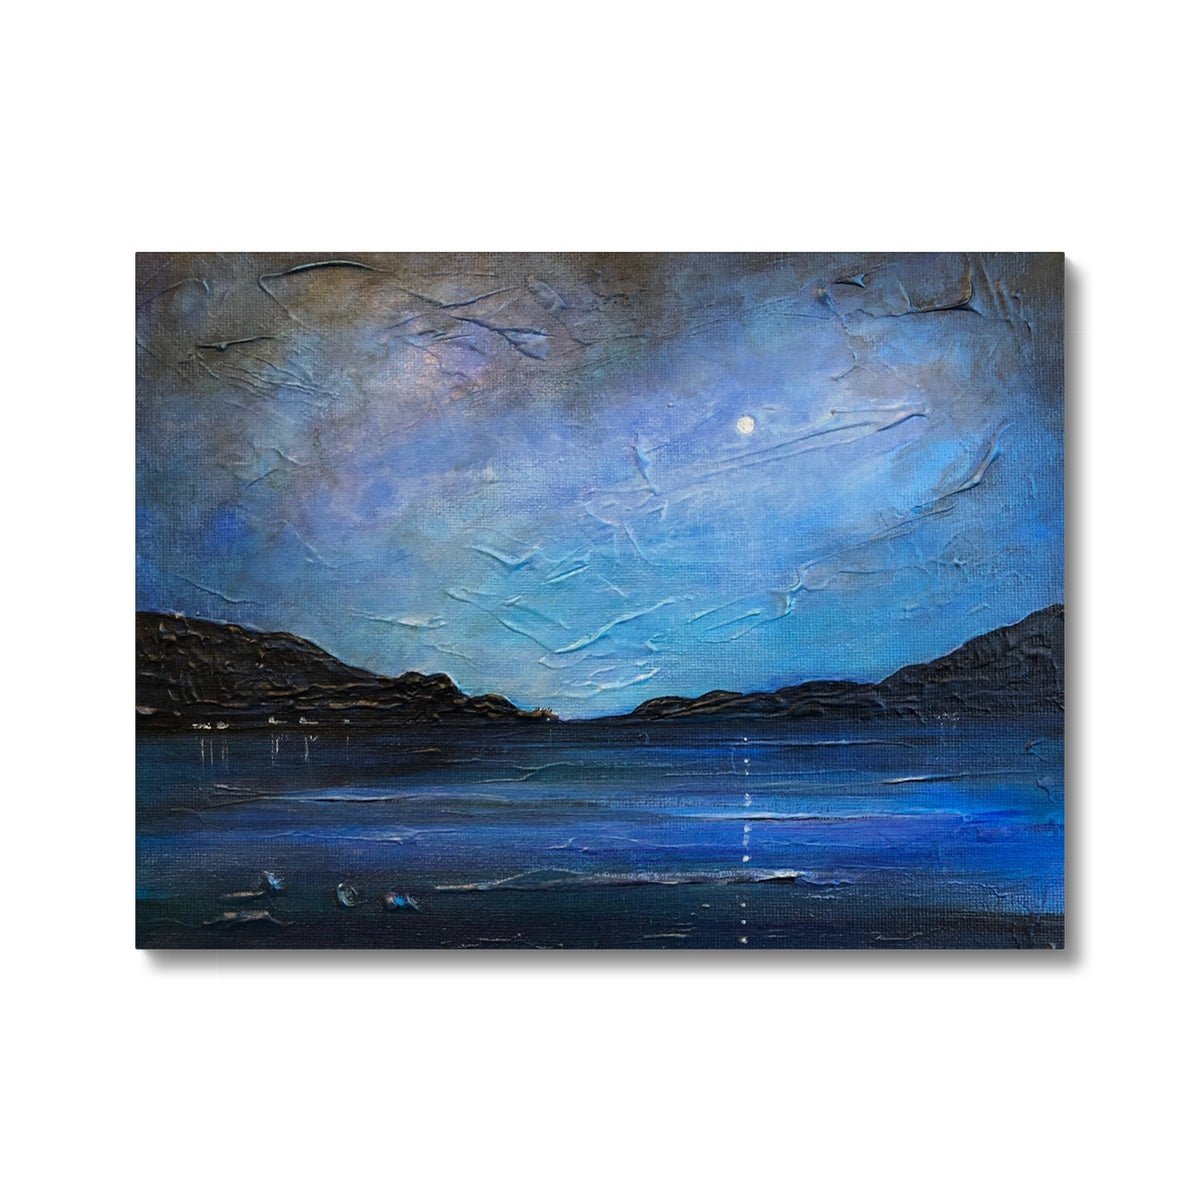 Loch Ness Moonlight Painting | Canvas From Scotland-Contemporary Stretched Canvas Prints-Scottish Lochs & Mountains Art Gallery-24"x18"-Paintings, Prints, Homeware, Art Gifts From Scotland By Scottish Artist Kevin Hunter